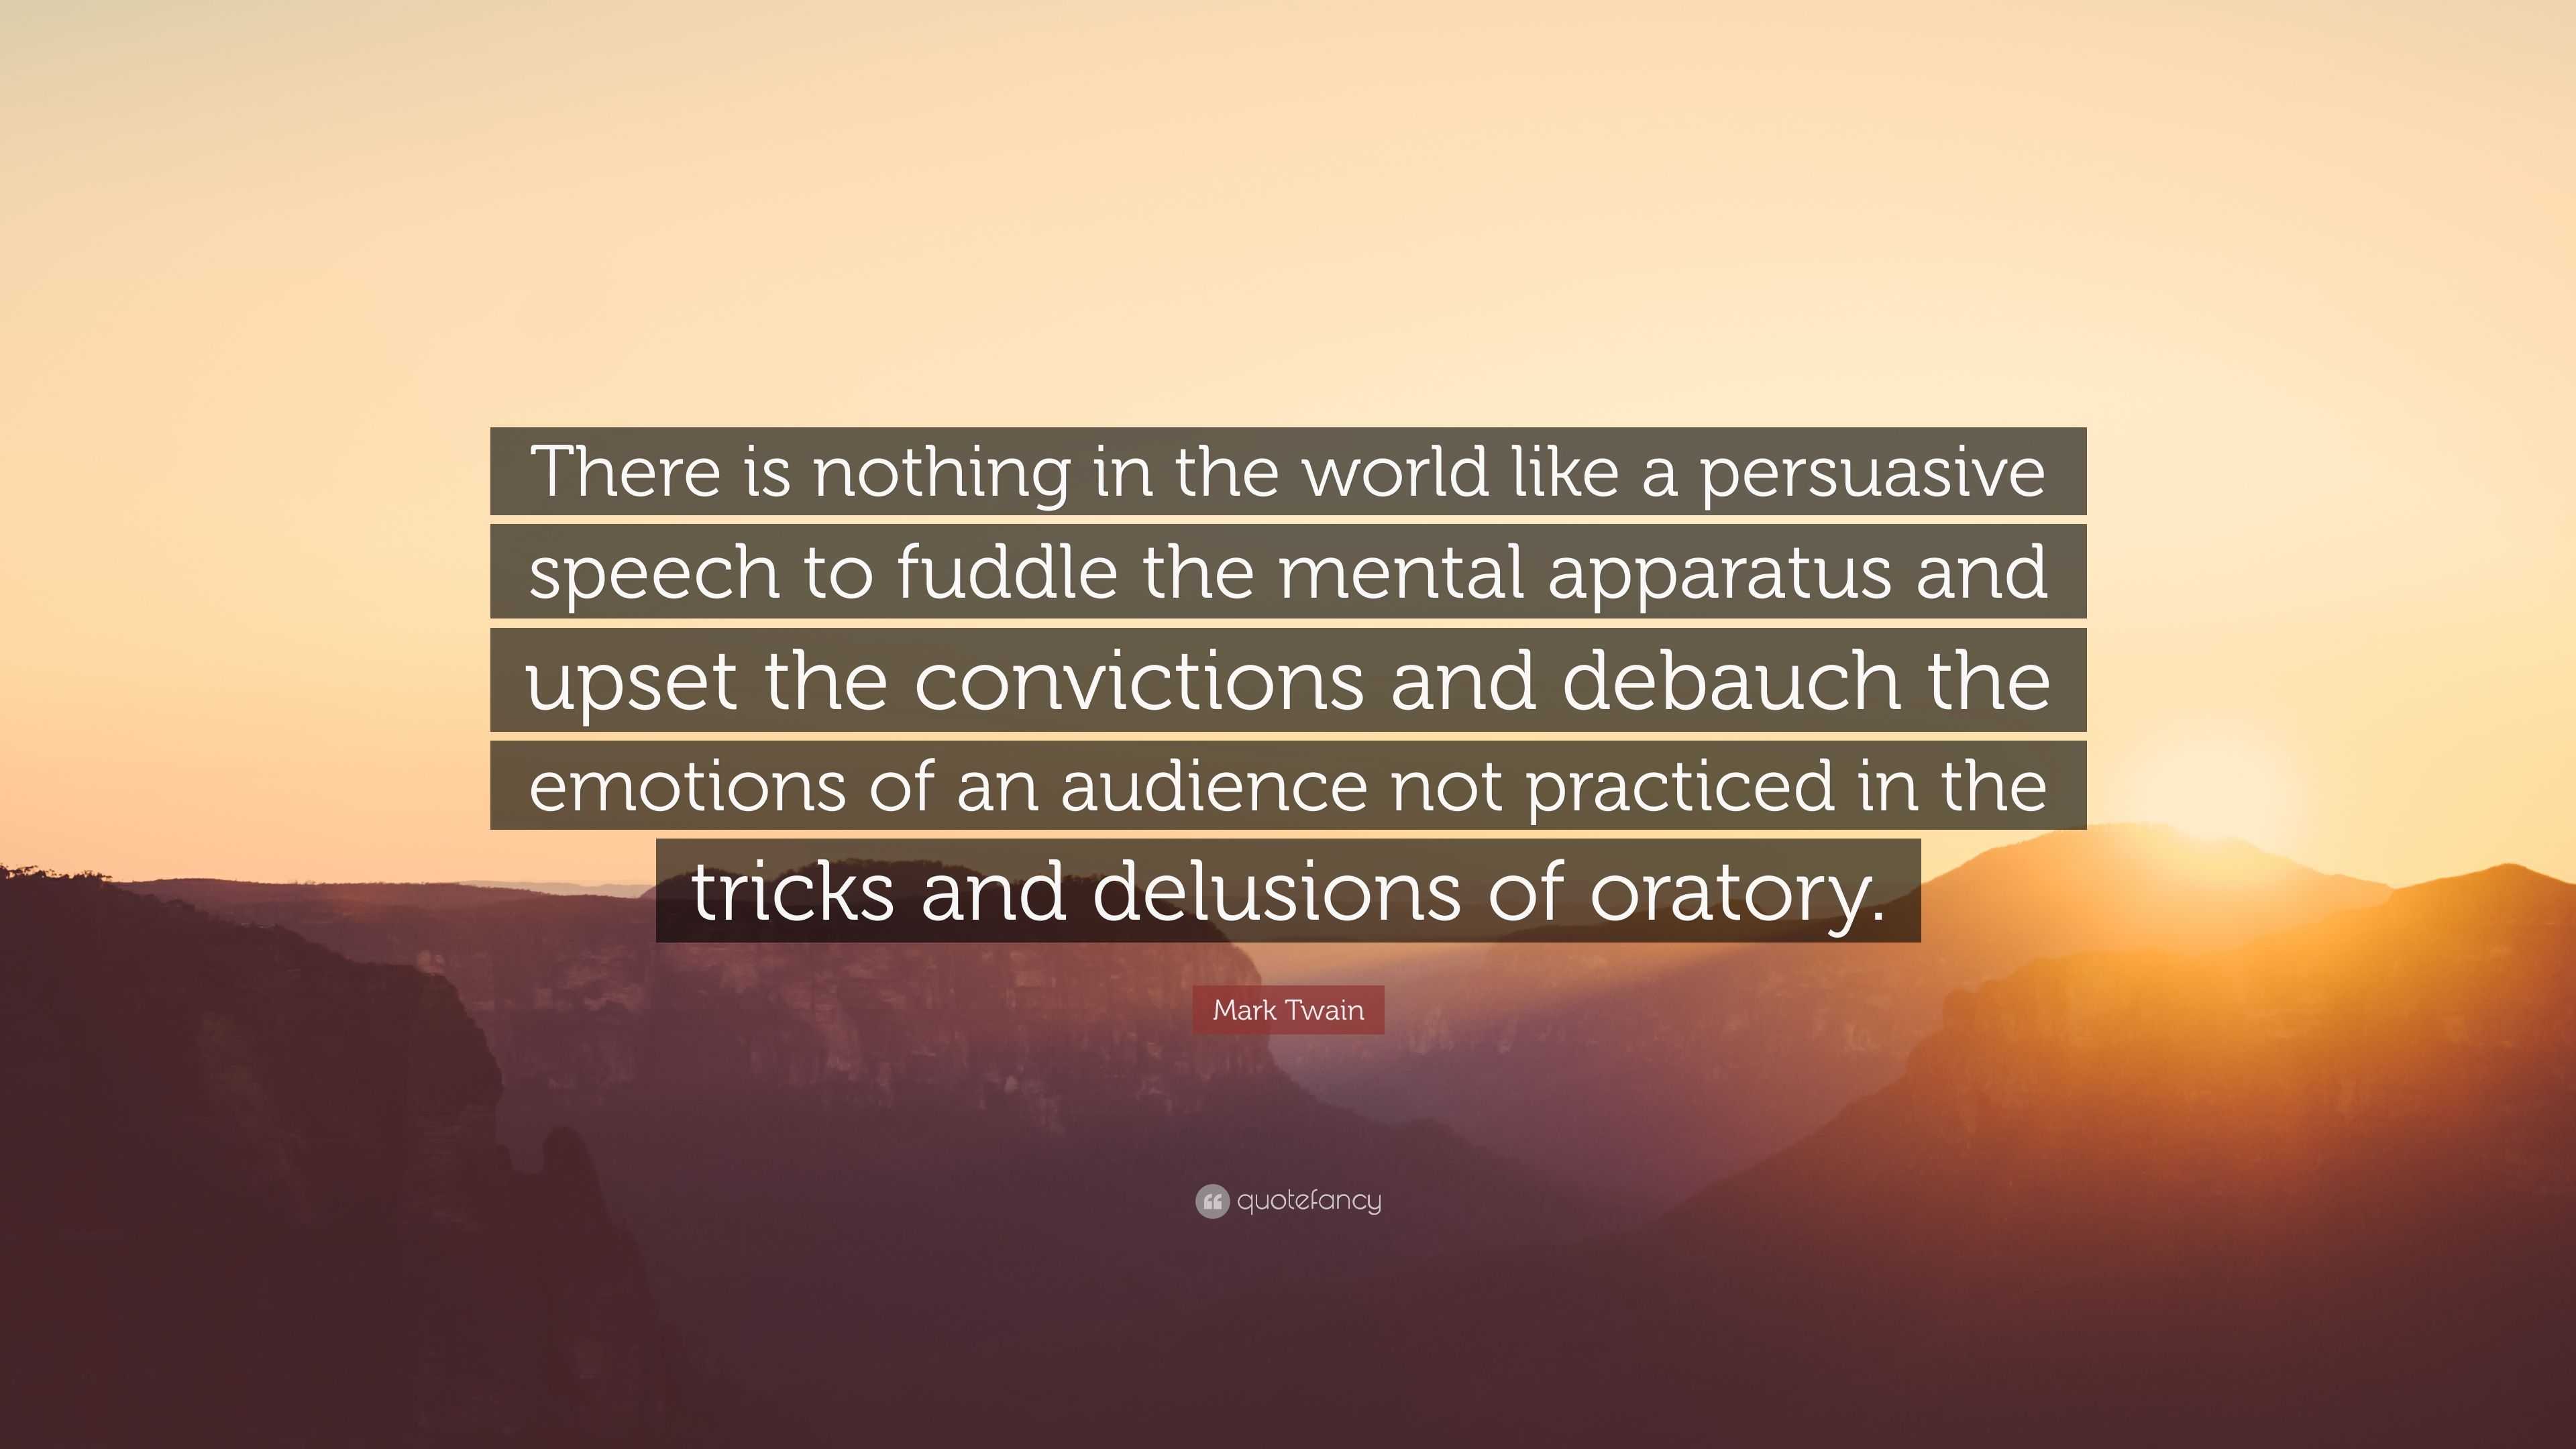 Mark Twain Quote: “There is nothing in the world like a persuasive ...